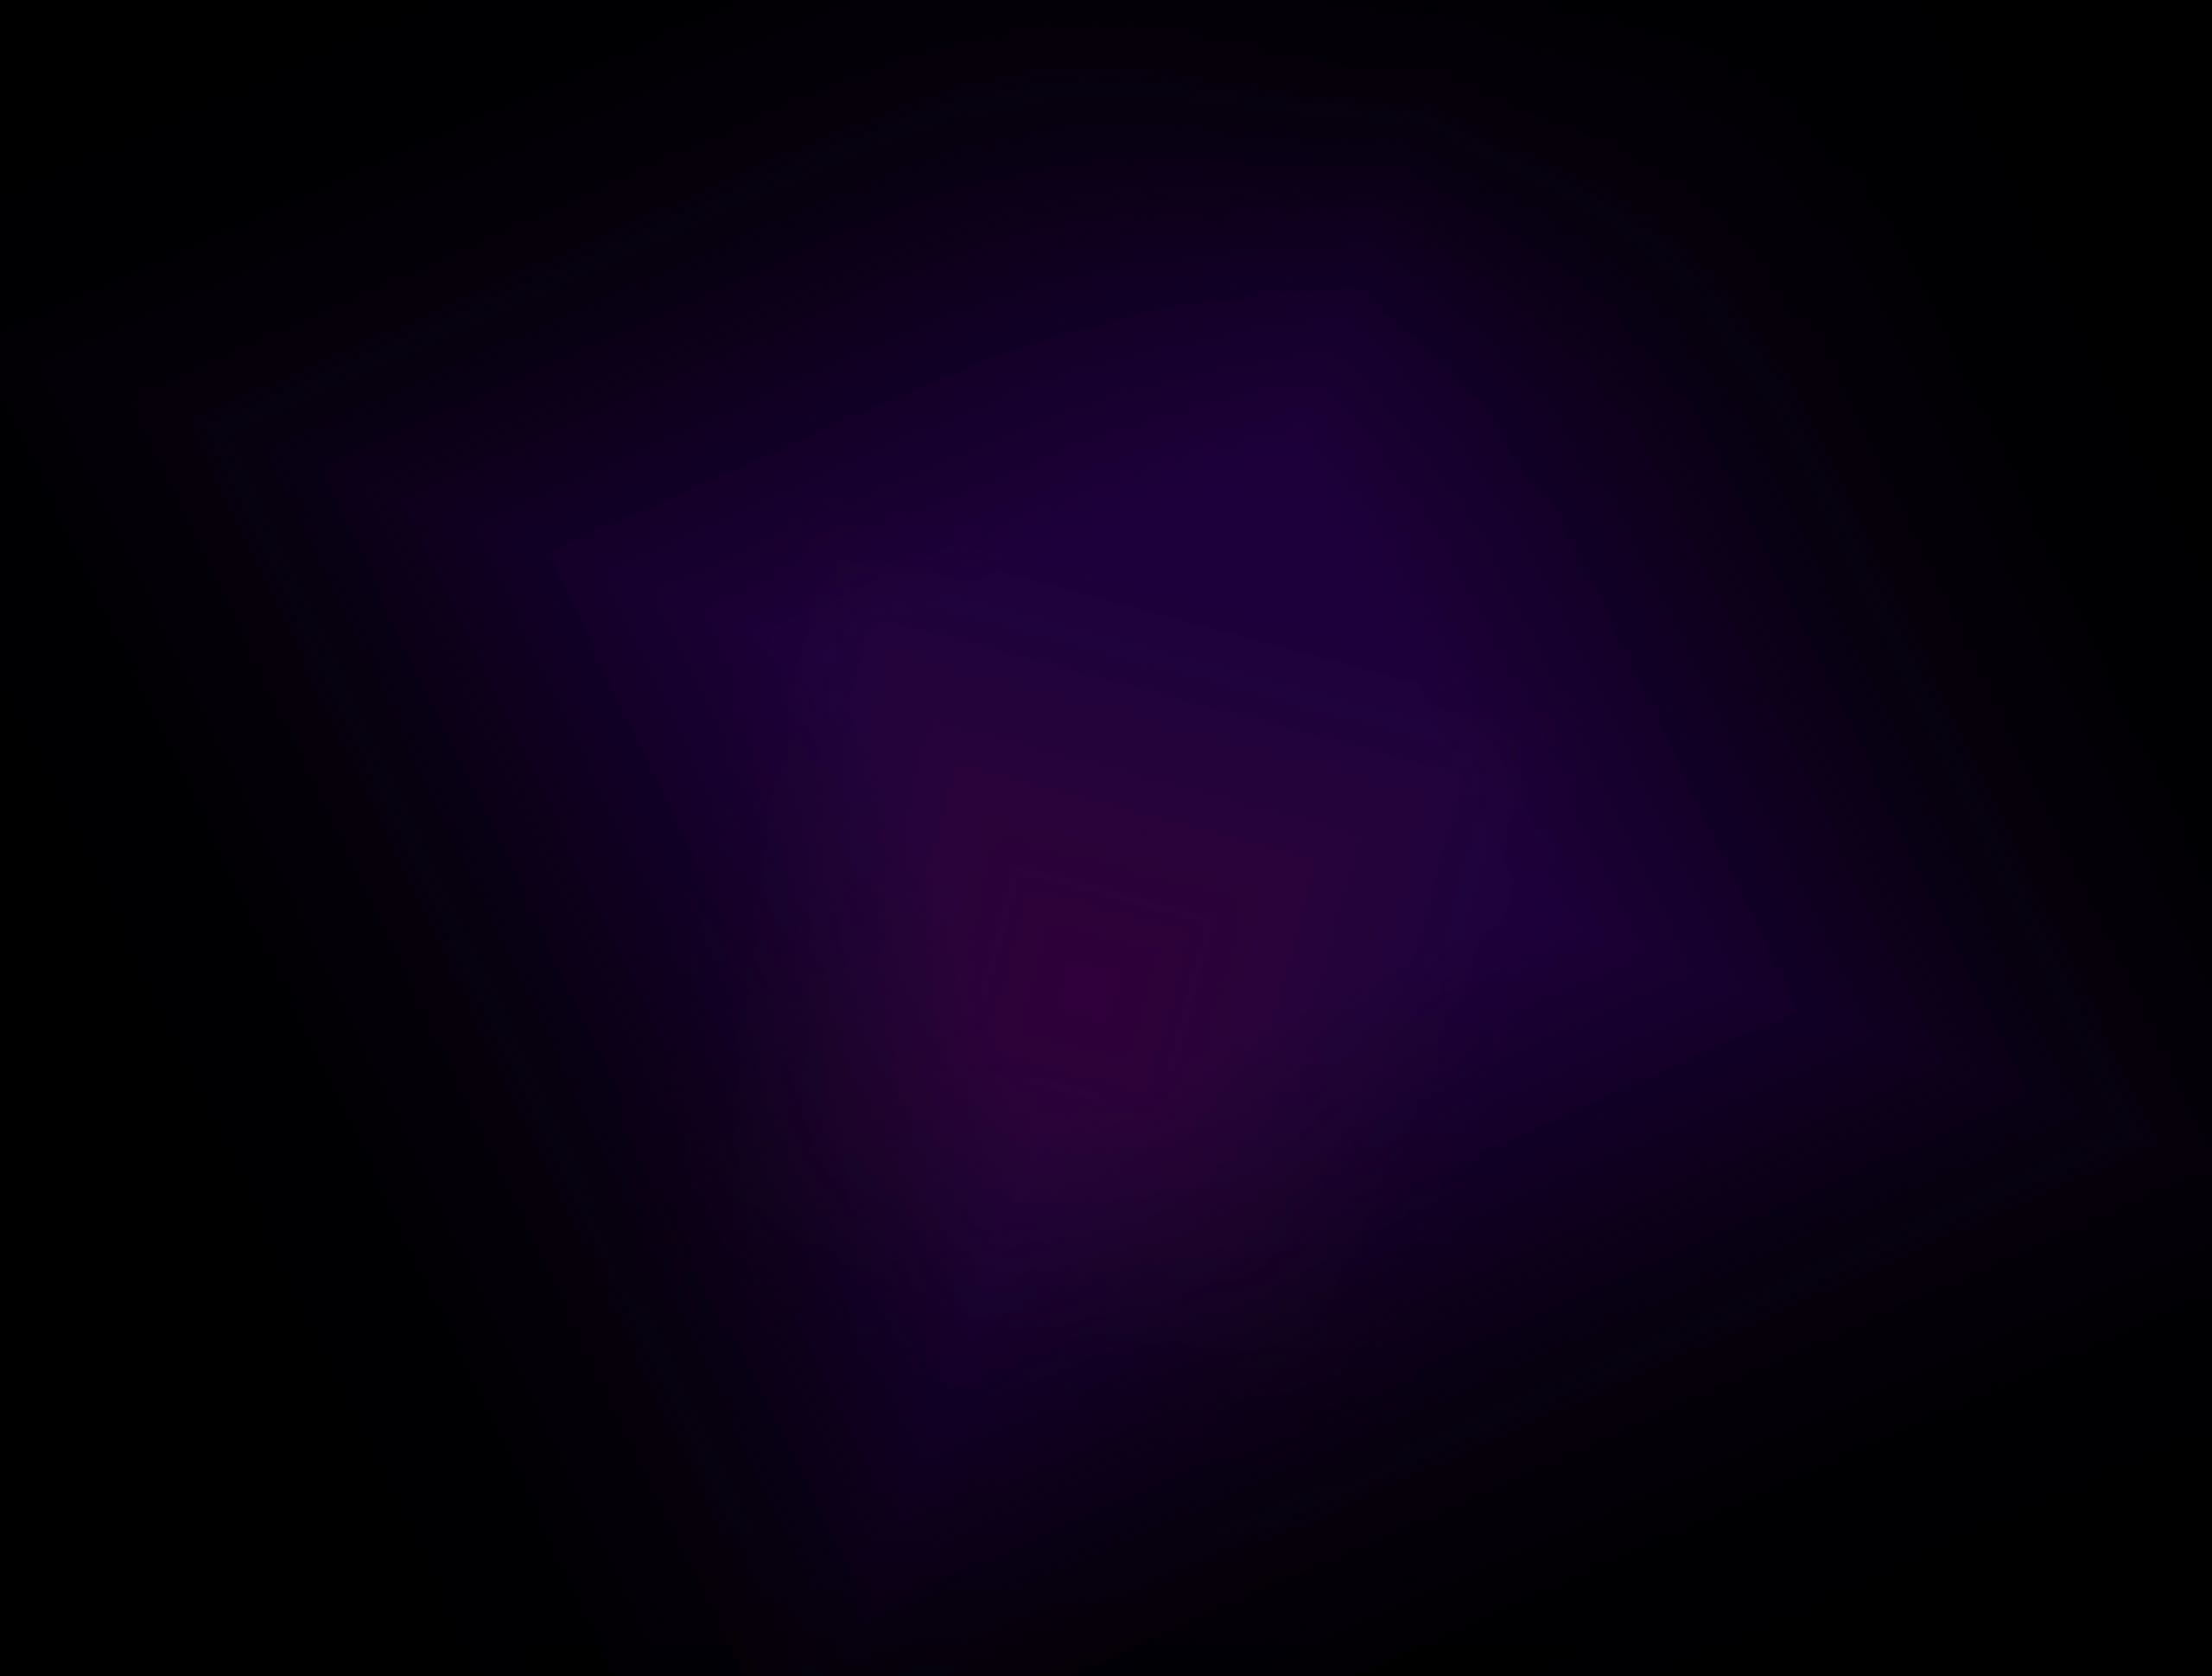 The background of gradient purple.